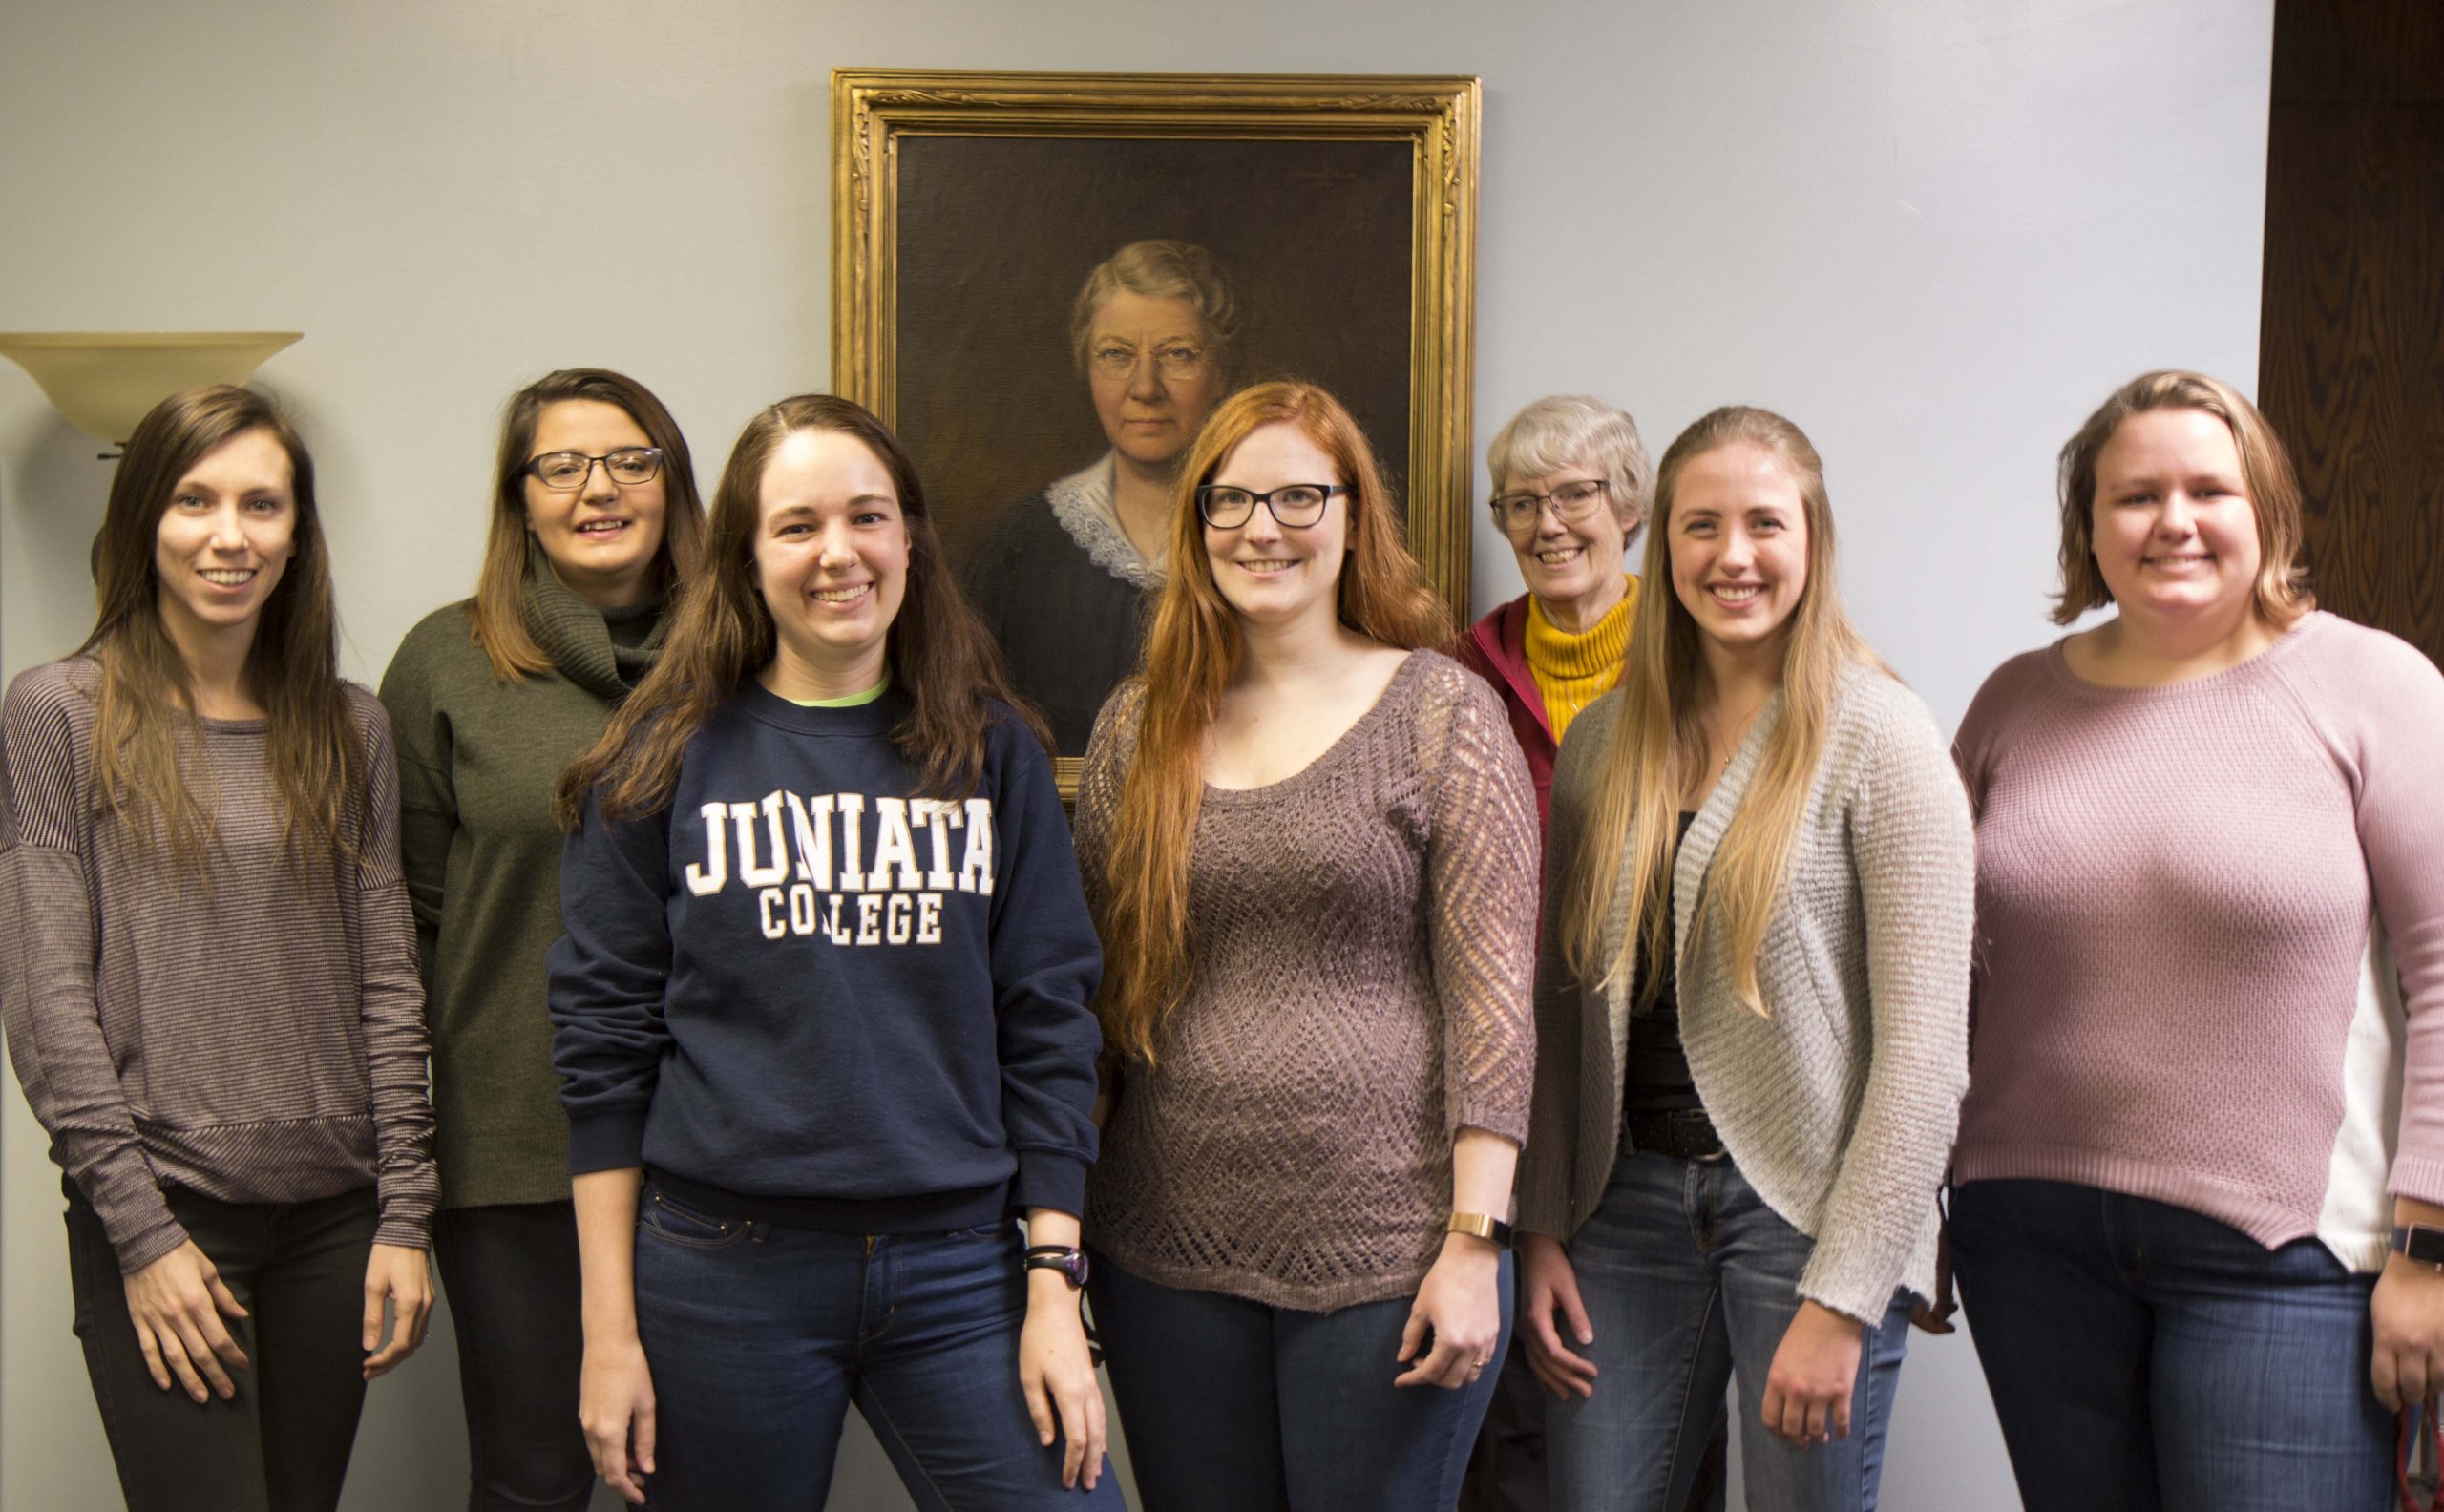 Graduate students and Leslie Hogben pose in front of a portrait.